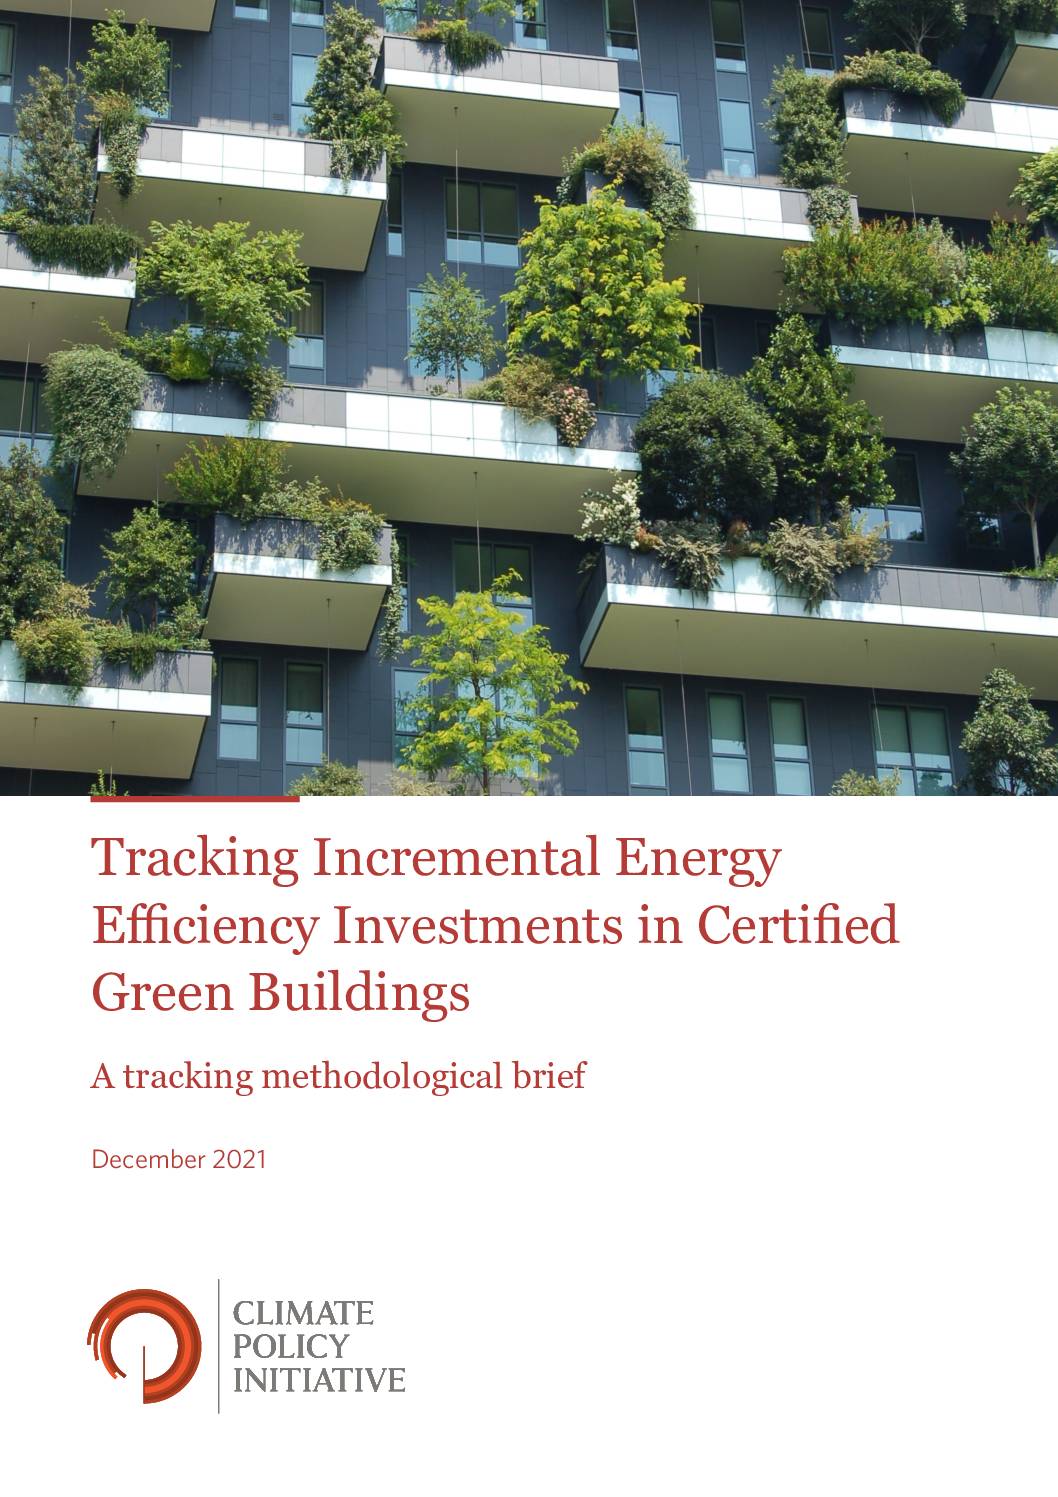 Tracking Incremental Energy Efficiency Investments in Certified Green Buildings